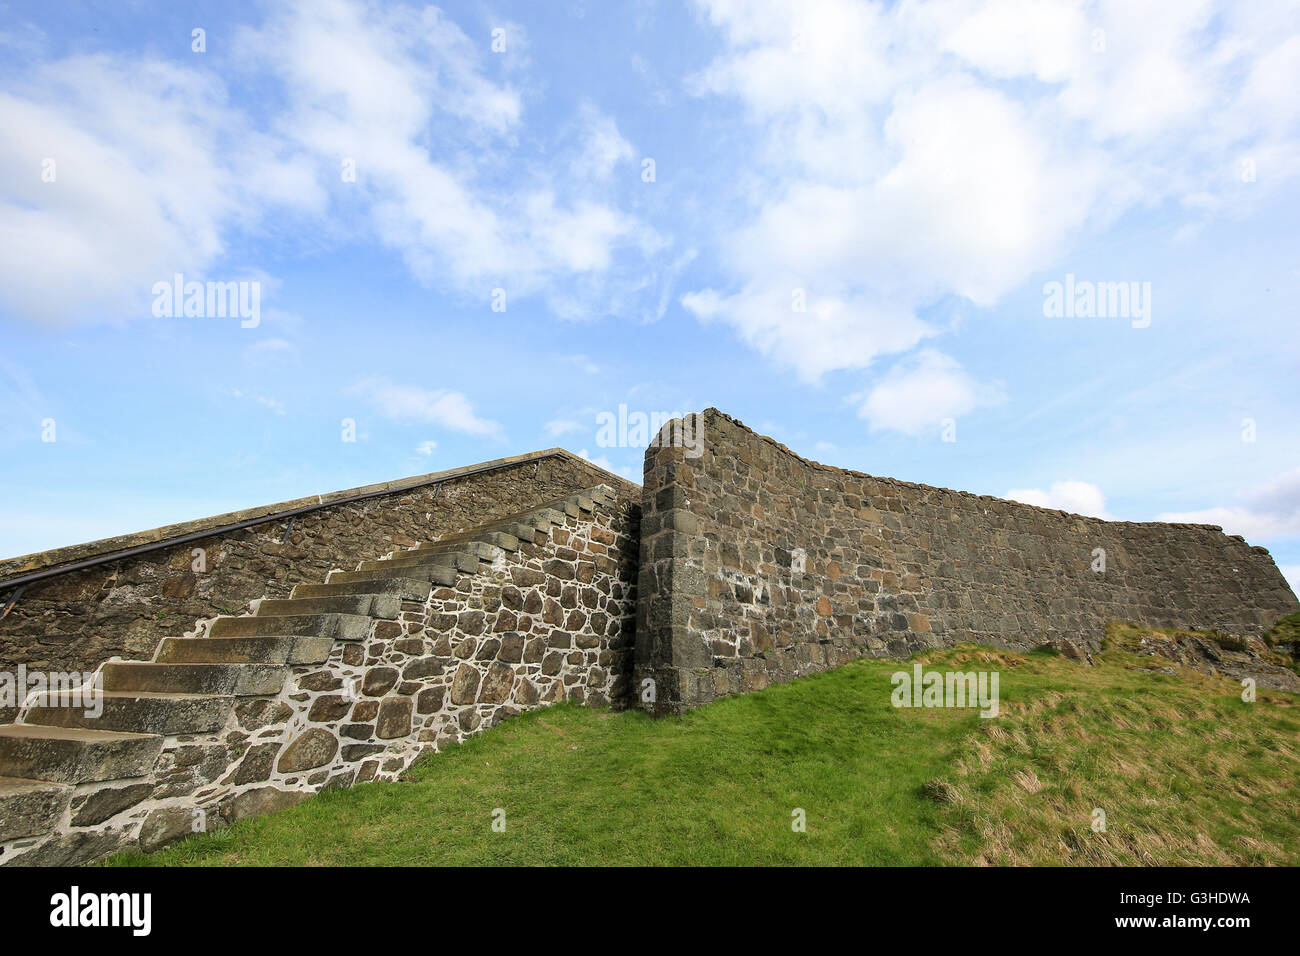 The beautiful Stirling Castle at Highland, Scotland Stock Photo